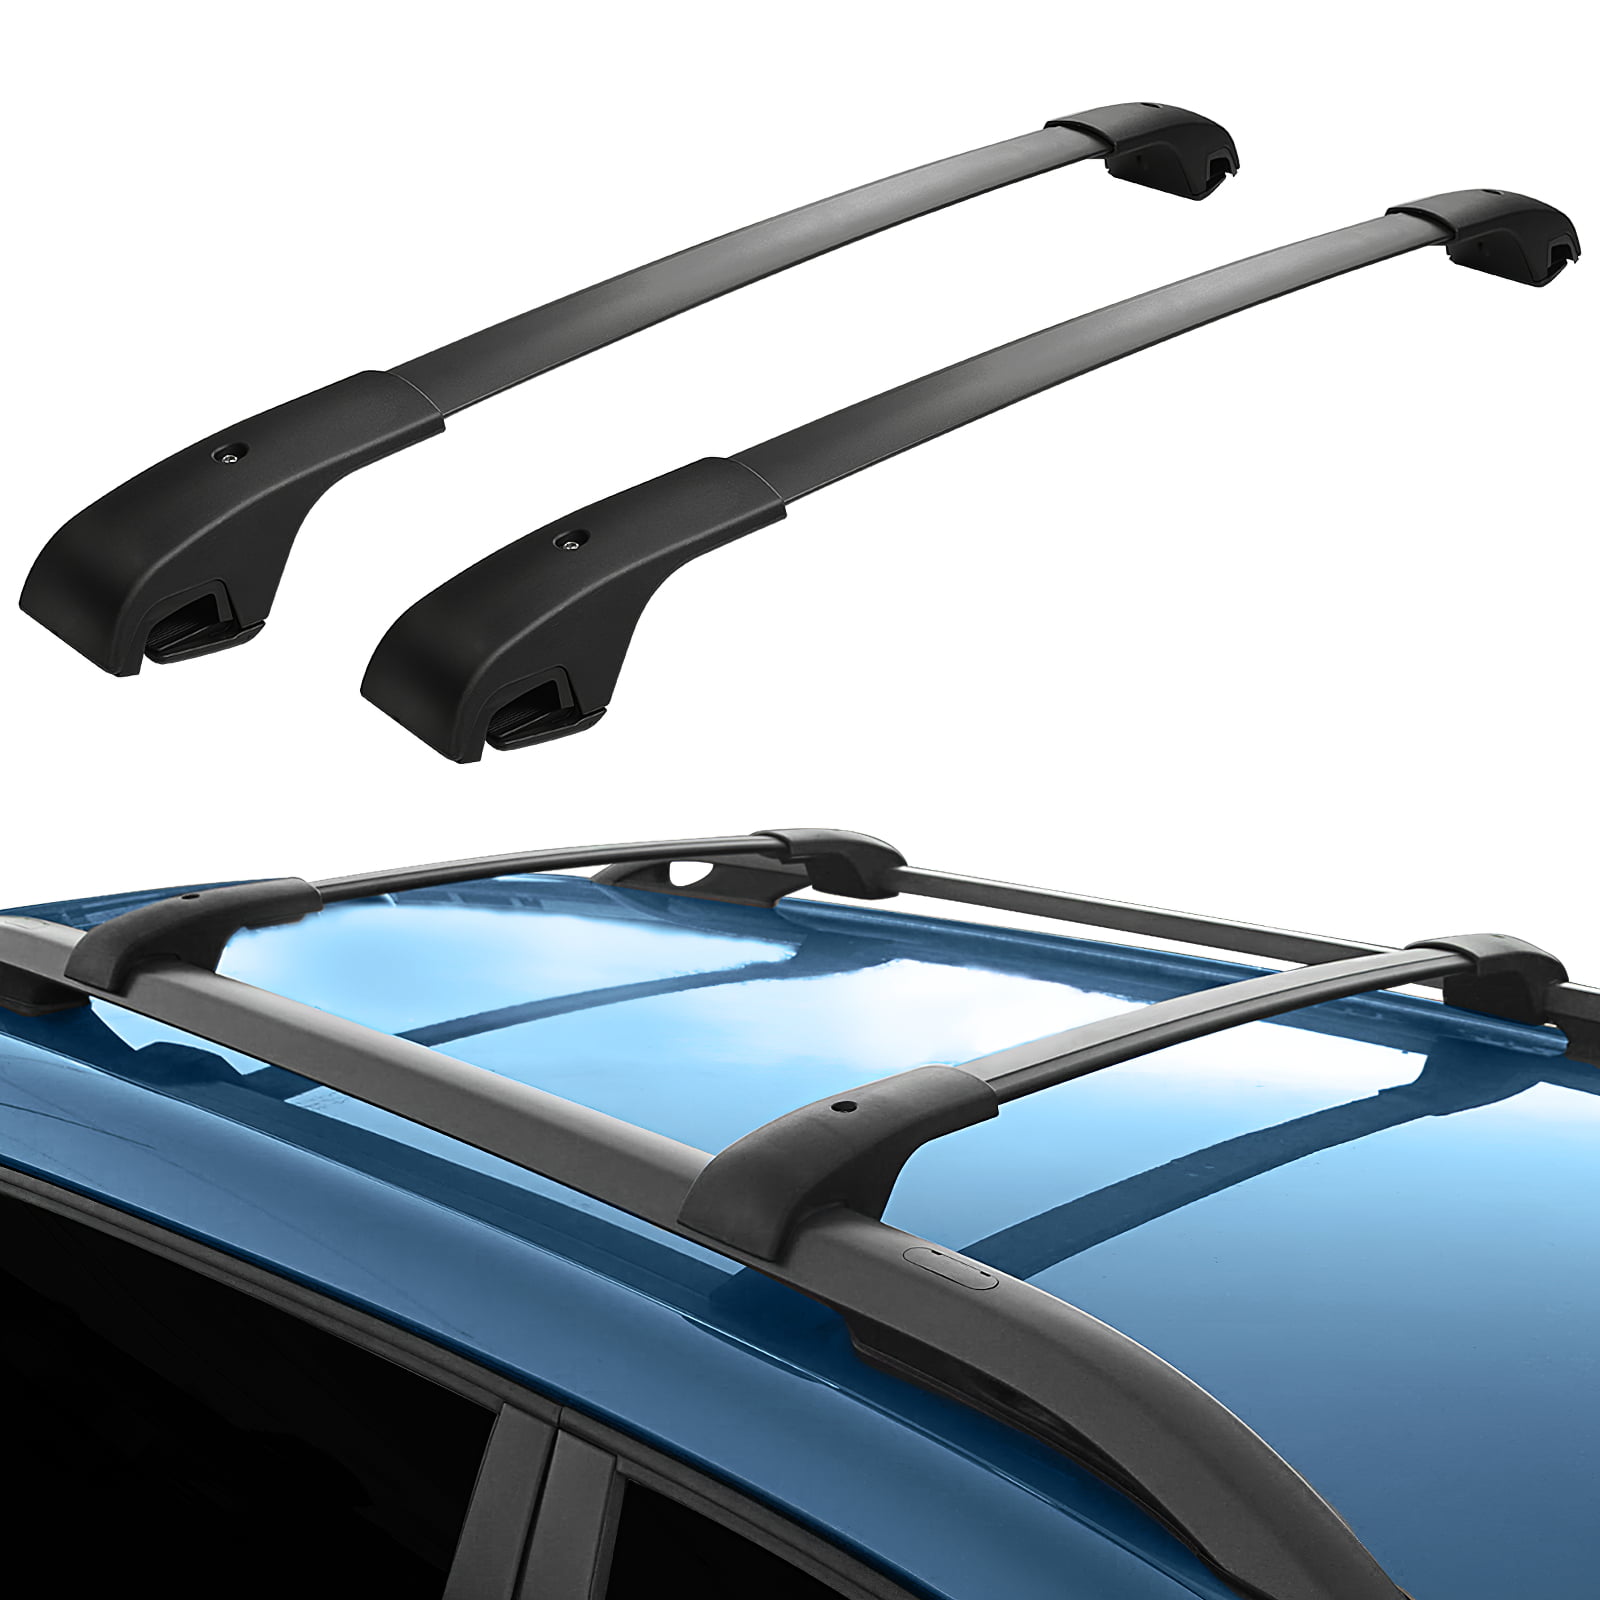 Roof Rack Cross Bars for 2014-2021 Jeep Cherokee Aluminum Luggage Carrier Replacement - Walmart 2014 Grand Cherokee Roof Rack Cross Bars